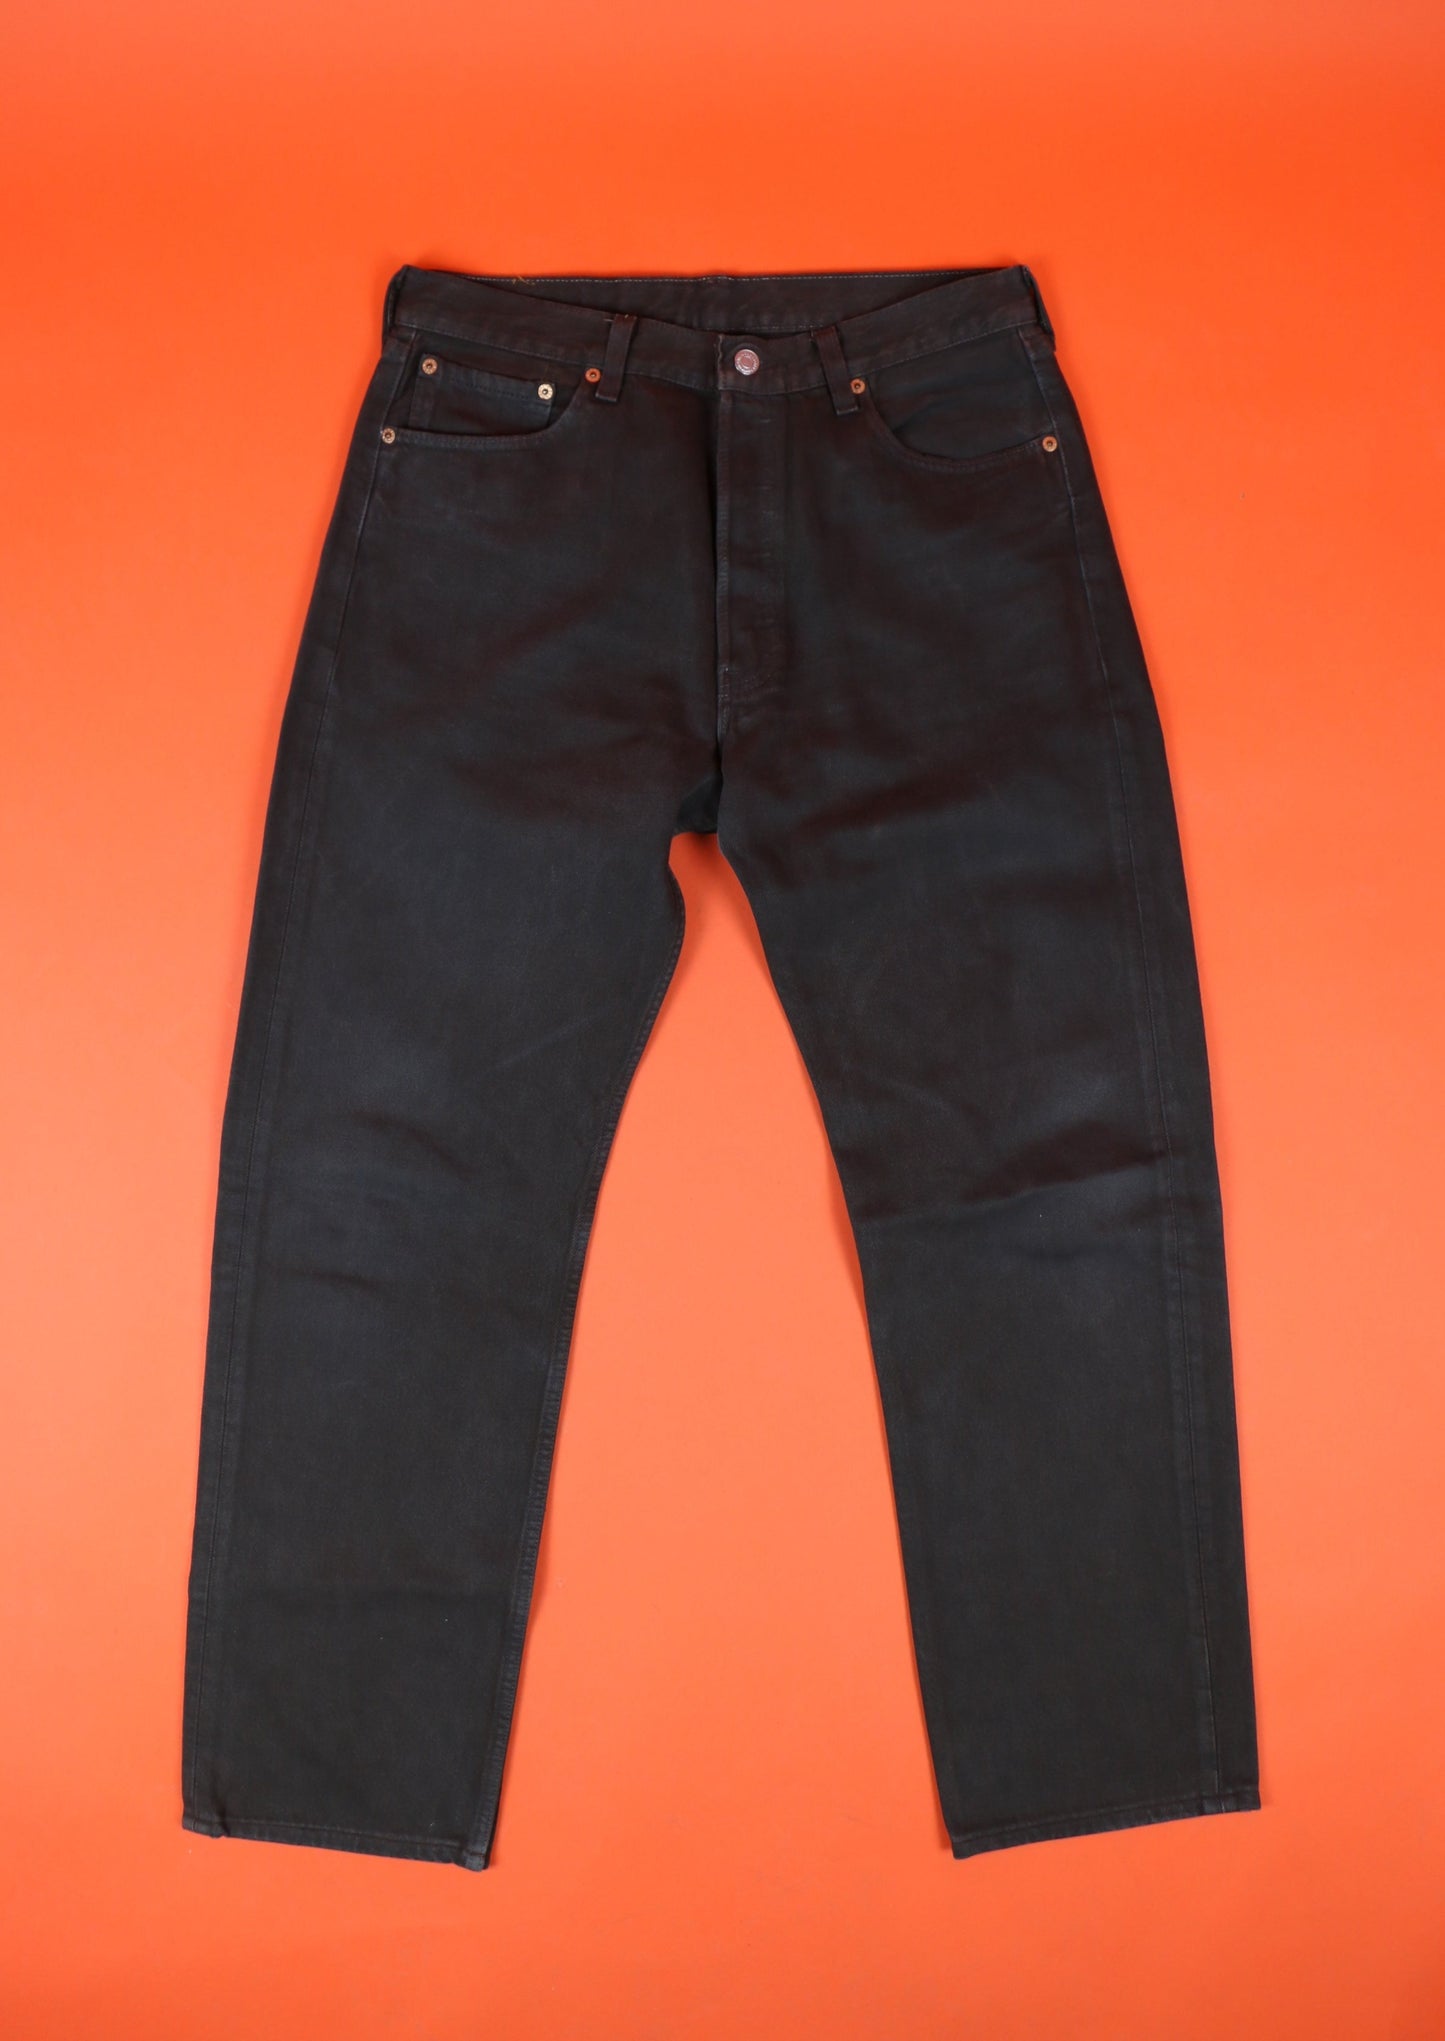 Levi's Made in U.S.A. Jeans W34 L36 - vintage clothing clochard92.com